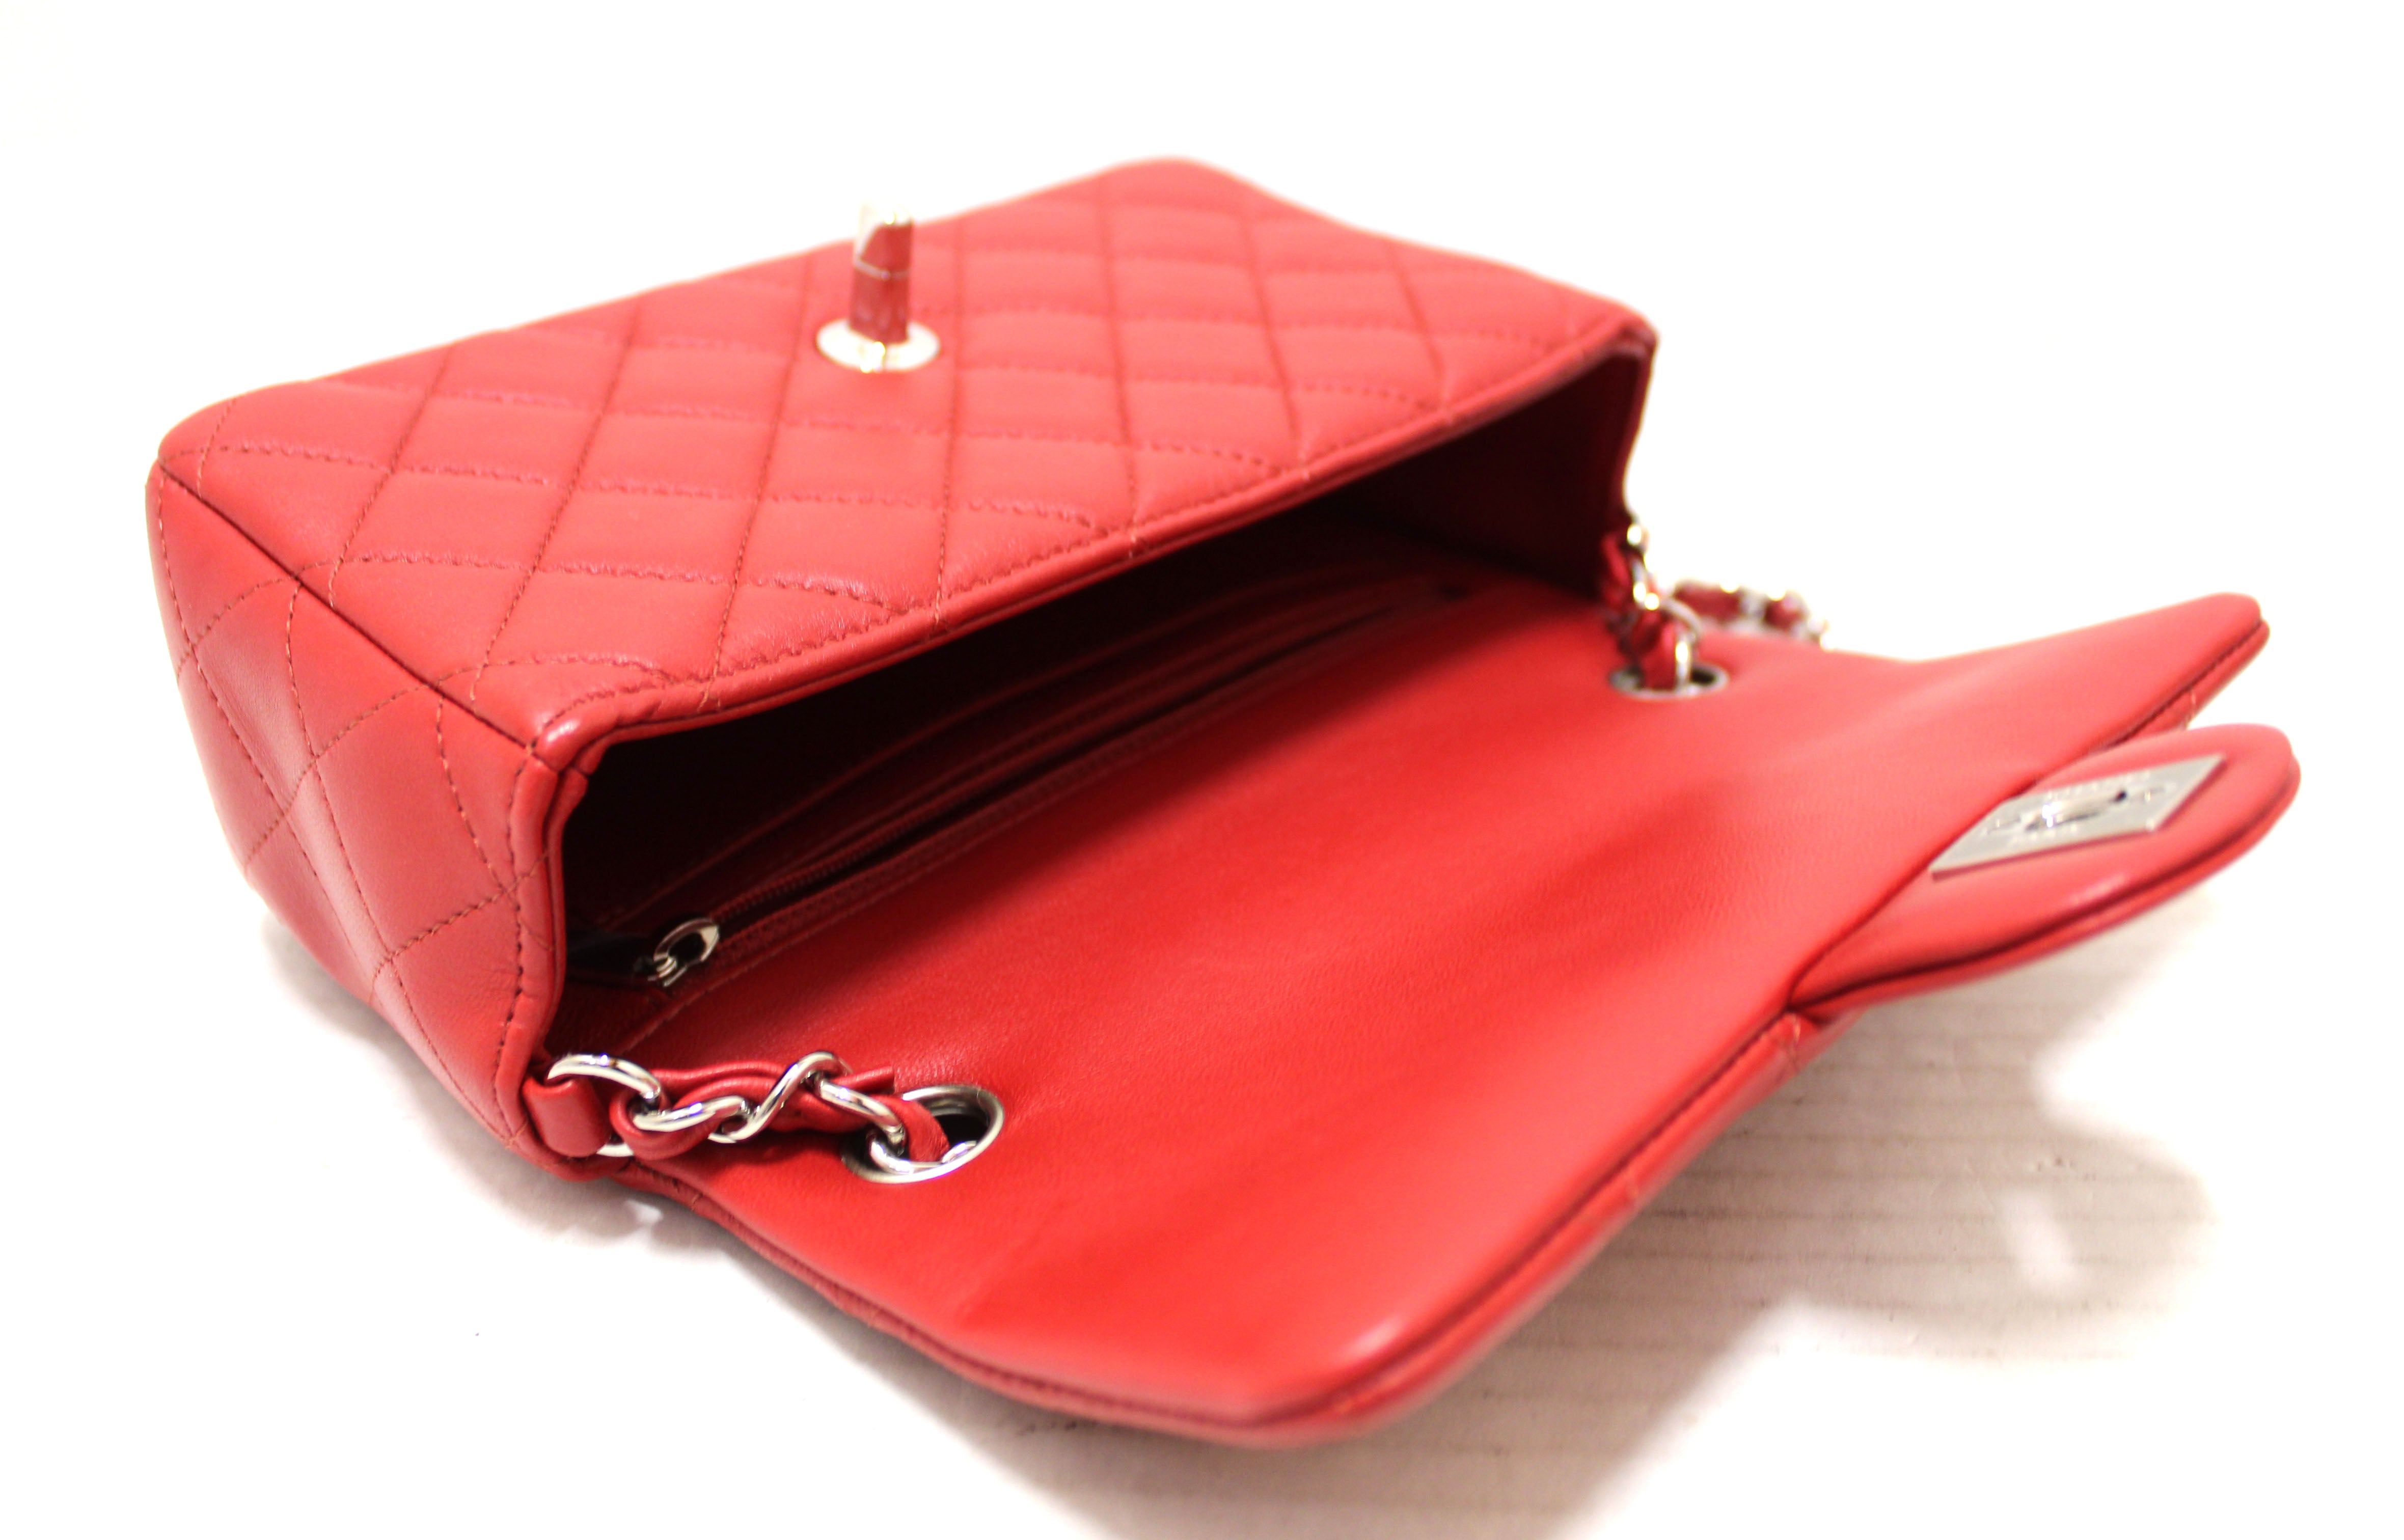 Authentic Chanel Red Classic Mini Flap Lambskin Leather Crossbody Bag